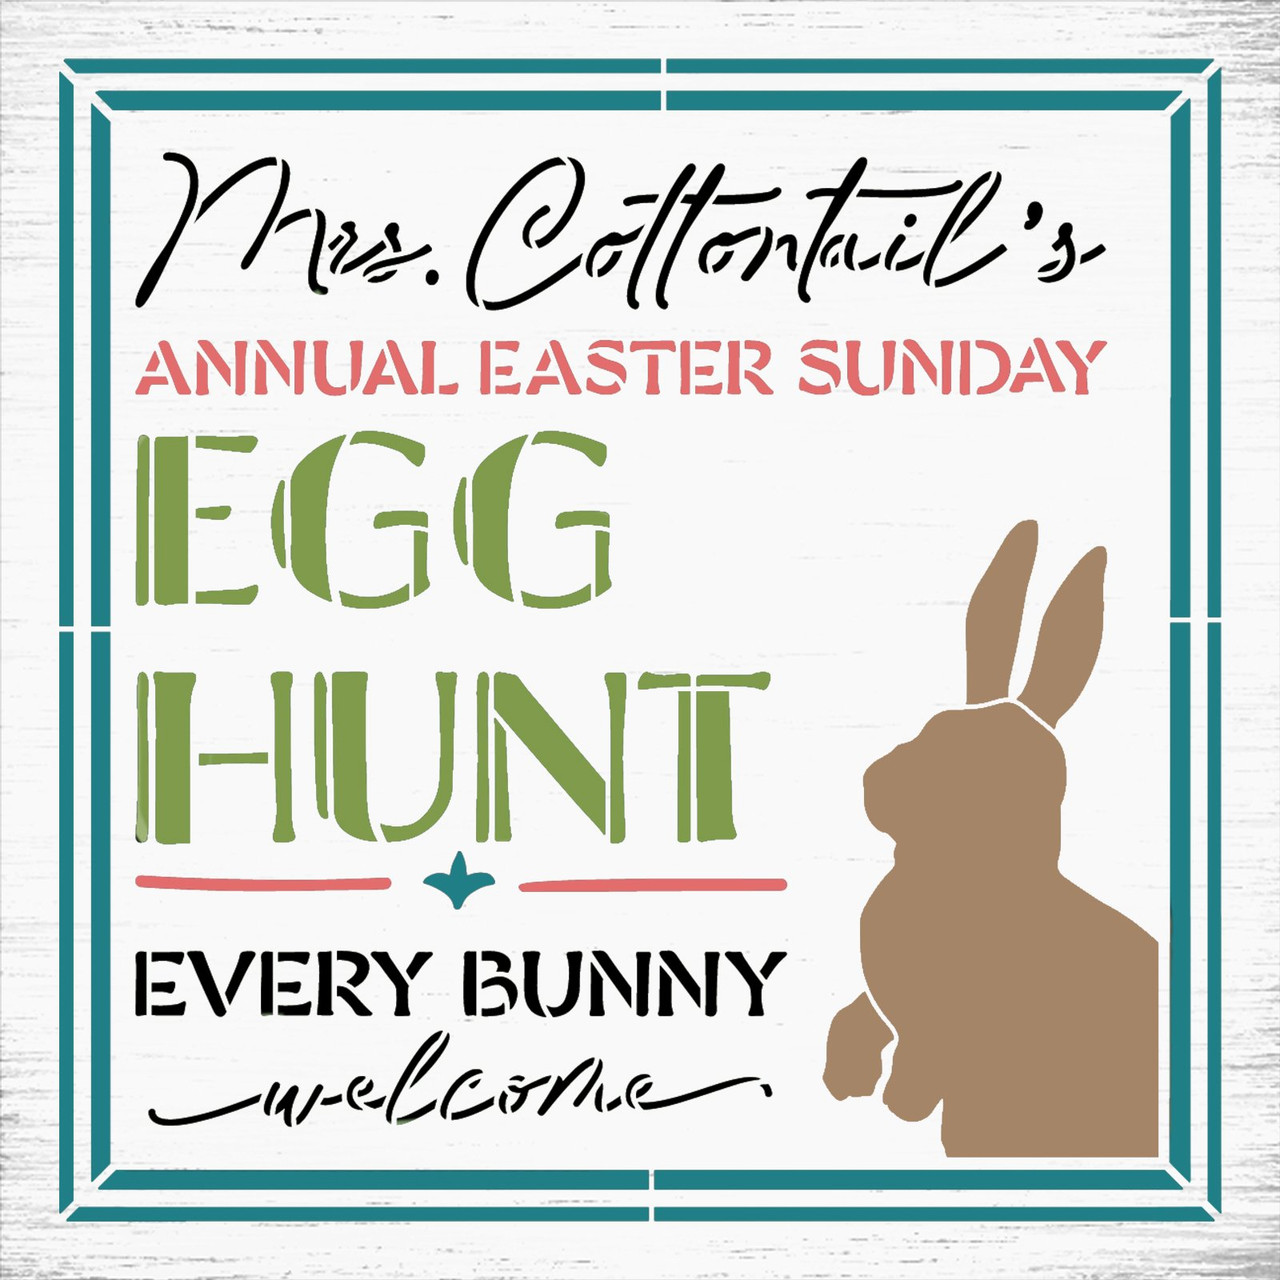 Mrs. Cottontail's Egg Hunt Stencil by StudioR12 | Craft DIY Spring Home Decor | Paint Easter Wood Sign | Reusable Mylar Template | Select Size